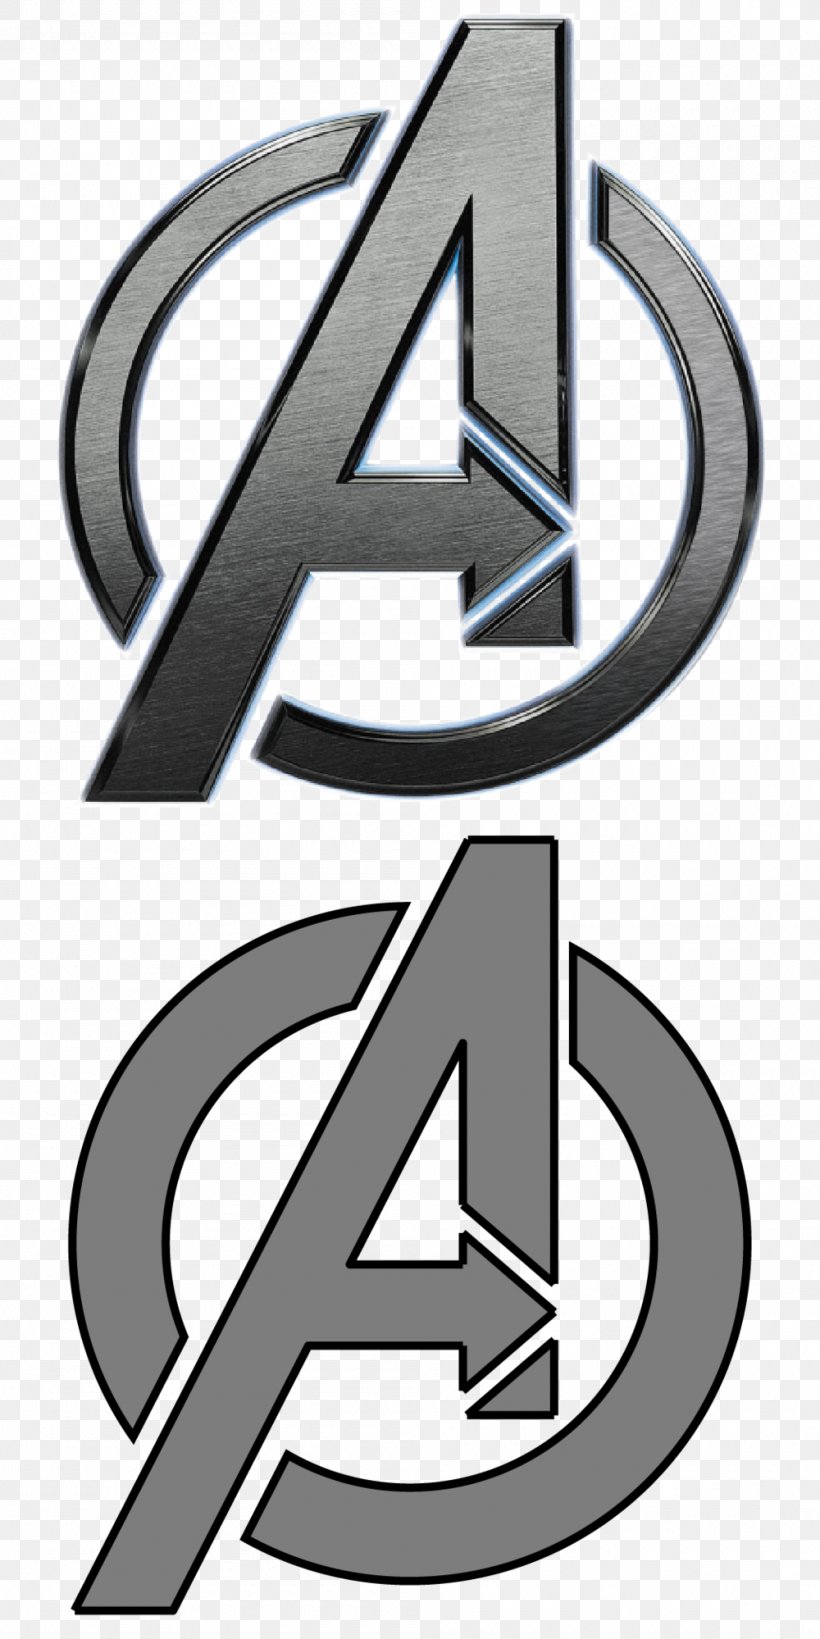 Captain America Thor Logo Black Widow Marvel Cinematic Universe, PNG, 1000x1999px, Captain America, Avengers, Avengers Age Of Ultron, Avengers Assemble, Avengers Infinity War Download Free